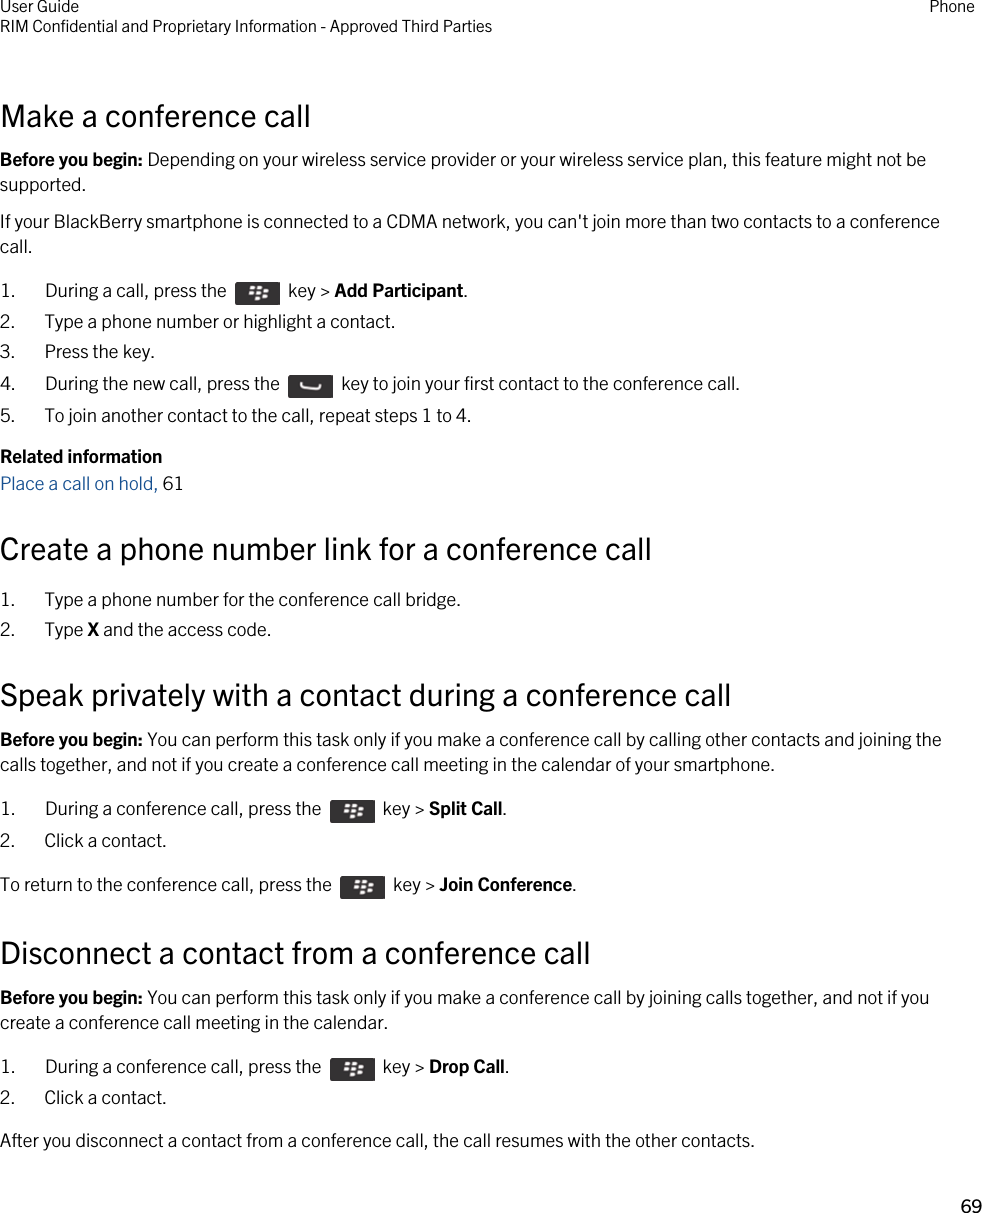 Make a conference callBefore you begin: Depending on your wireless service provider or your wireless service plan, this feature might not be supported.If your BlackBerry smartphone is connected to a CDMA network, you can&apos;t join more than two contacts to a conference call.1.  During a call, press the    key &gt; Add Participant.2. Type a phone number or highlight a contact.3. Press the key.4.  During the new call, press the    key to join your first contact to the conference call. 5. To join another contact to the call, repeat steps 1 to 4.Related informationPlace a call on hold, 61 Create a phone number link for a conference call1. Type a phone number for the conference call bridge.2. Type X and the access code.Speak privately with a contact during a conference callBefore you begin: You can perform this task only if you make a conference call by calling other contacts and joining the calls together, and not if you create a conference call meeting in the calendar of your smartphone.1.  During a conference call, press the    key &gt; Split Call.2. Click a contact.To return to the conference call, press the    key &gt; Join Conference.Disconnect a contact from a conference callBefore you begin: You can perform this task only if you make a conference call by joining calls together, and not if you create a conference call meeting in the calendar.1.  During a conference call, press the    key &gt; Drop Call.2. Click a contact.After you disconnect a contact from a conference call, the call resumes with the other contacts.User GuideRIM Confidential and Proprietary Information - Approved Third Parties Phone69 